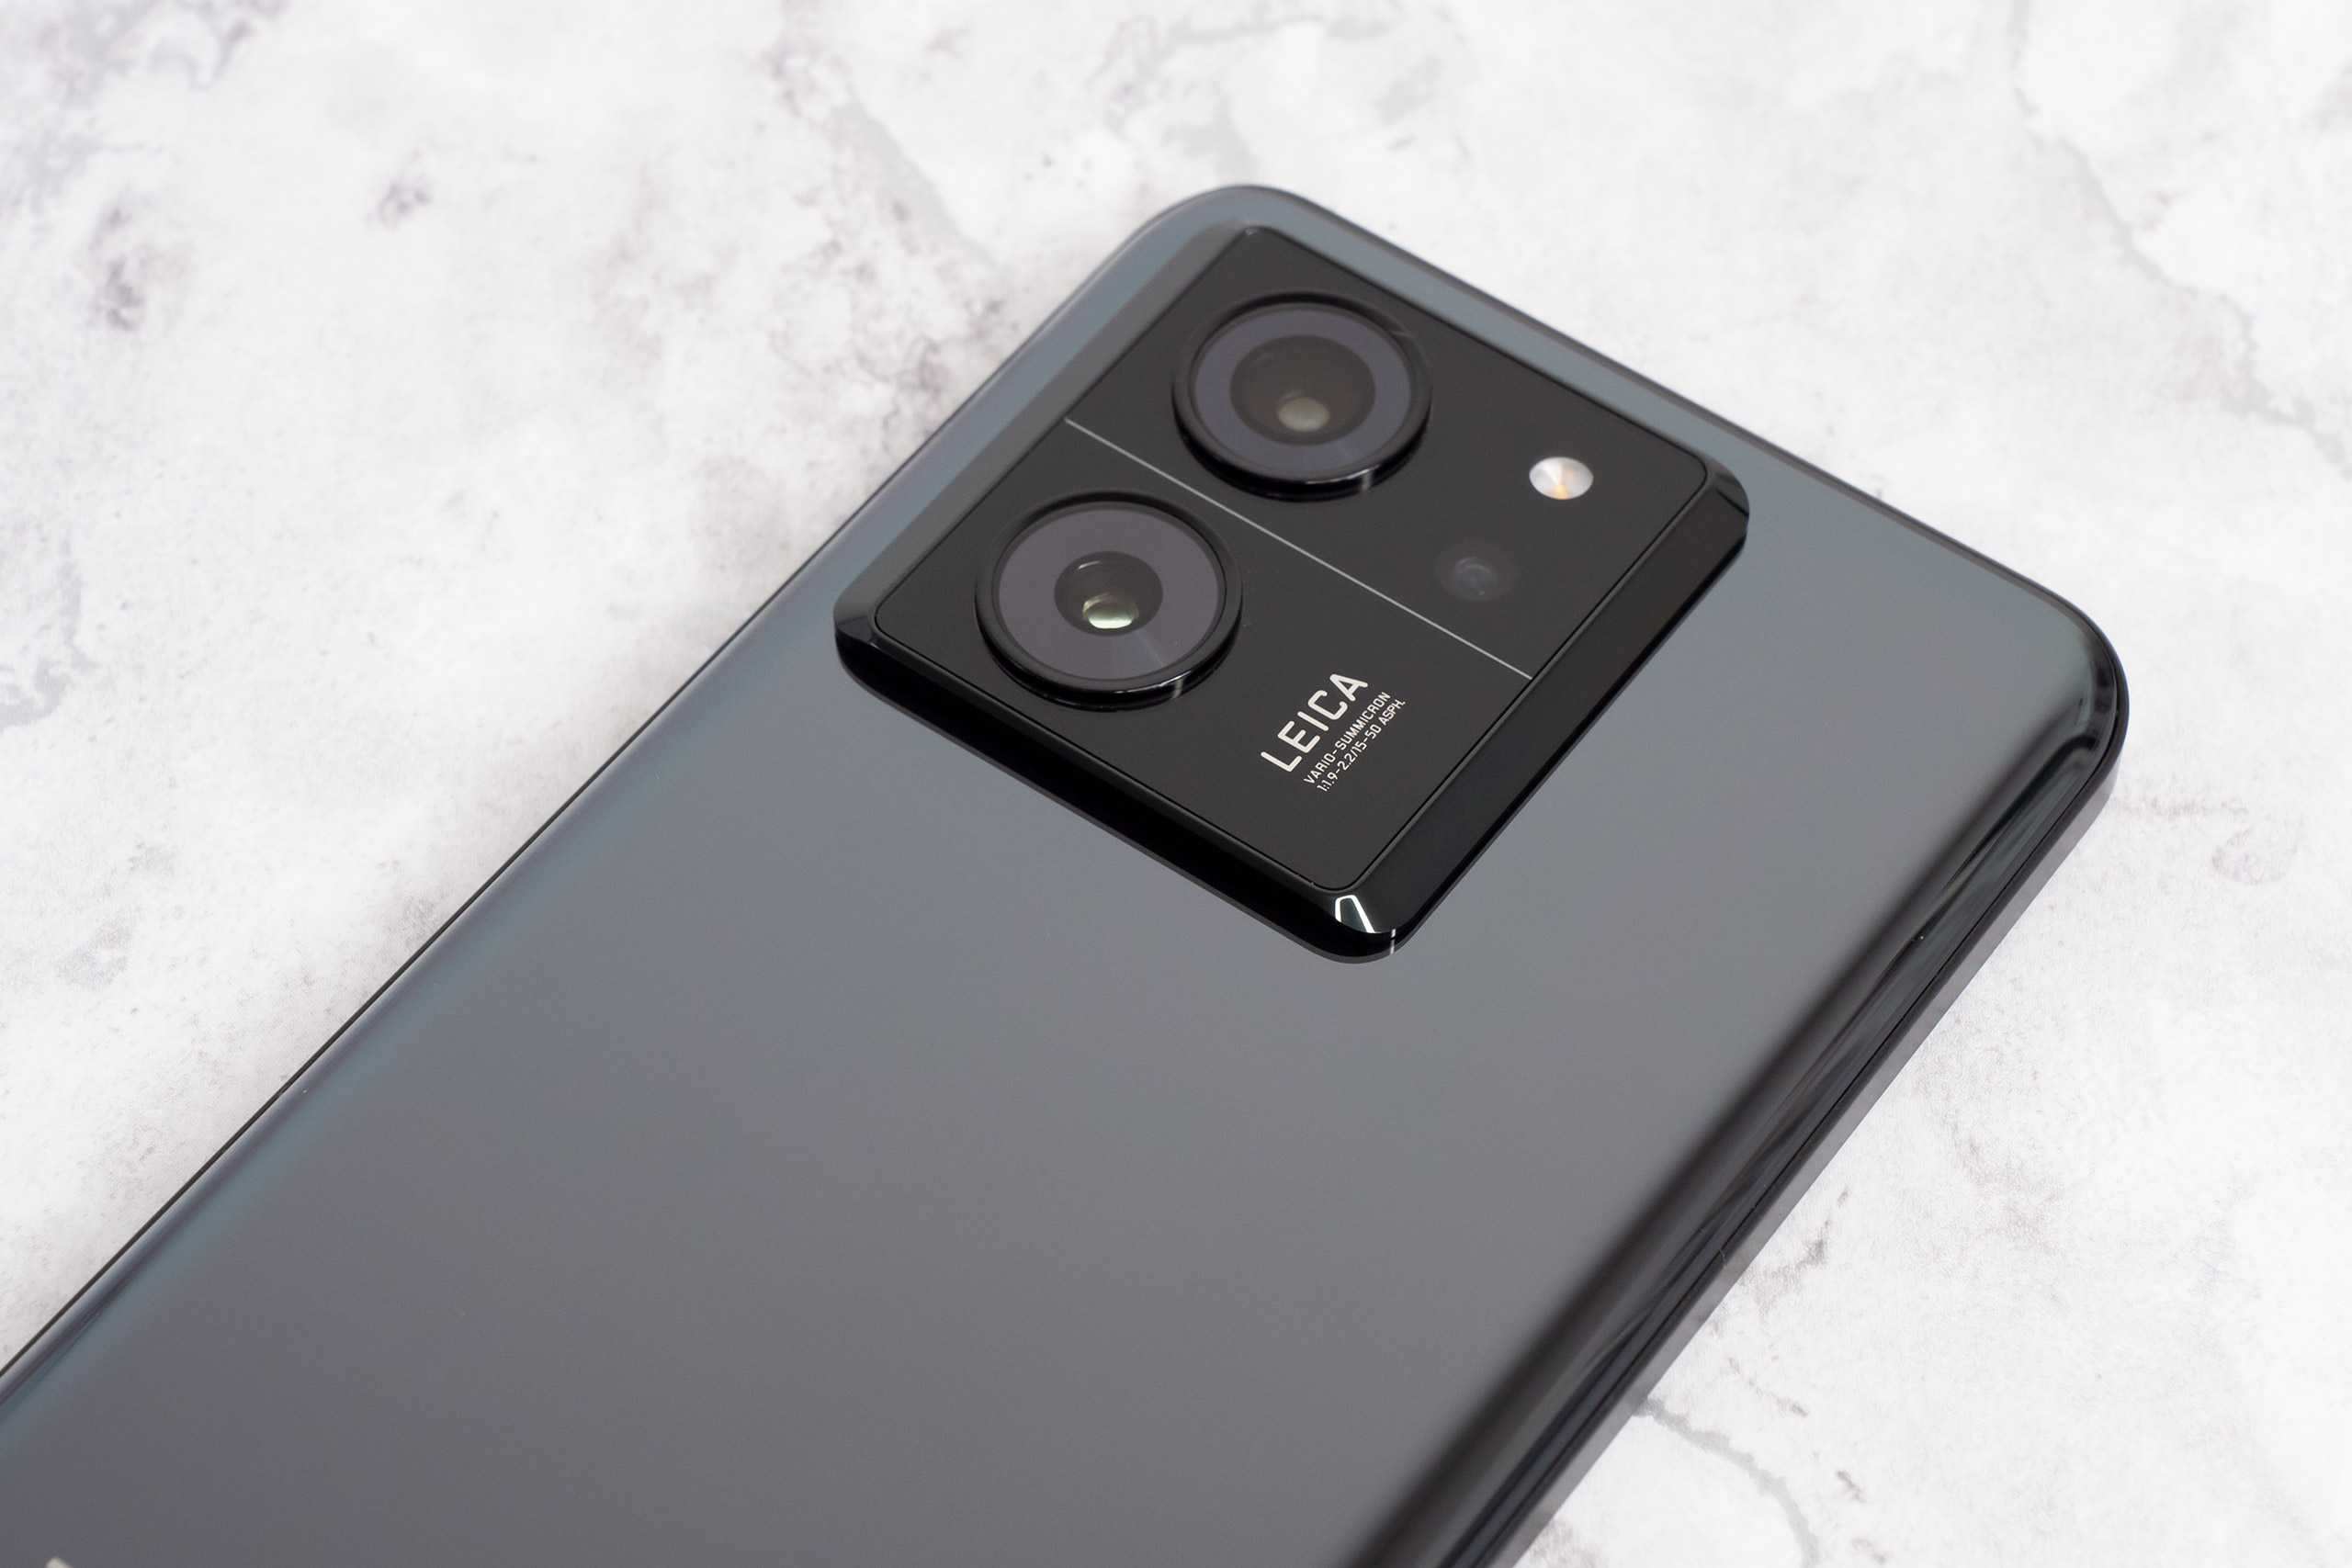 Xiaomi partners with Leica to bring DSLR-like camera capabilities